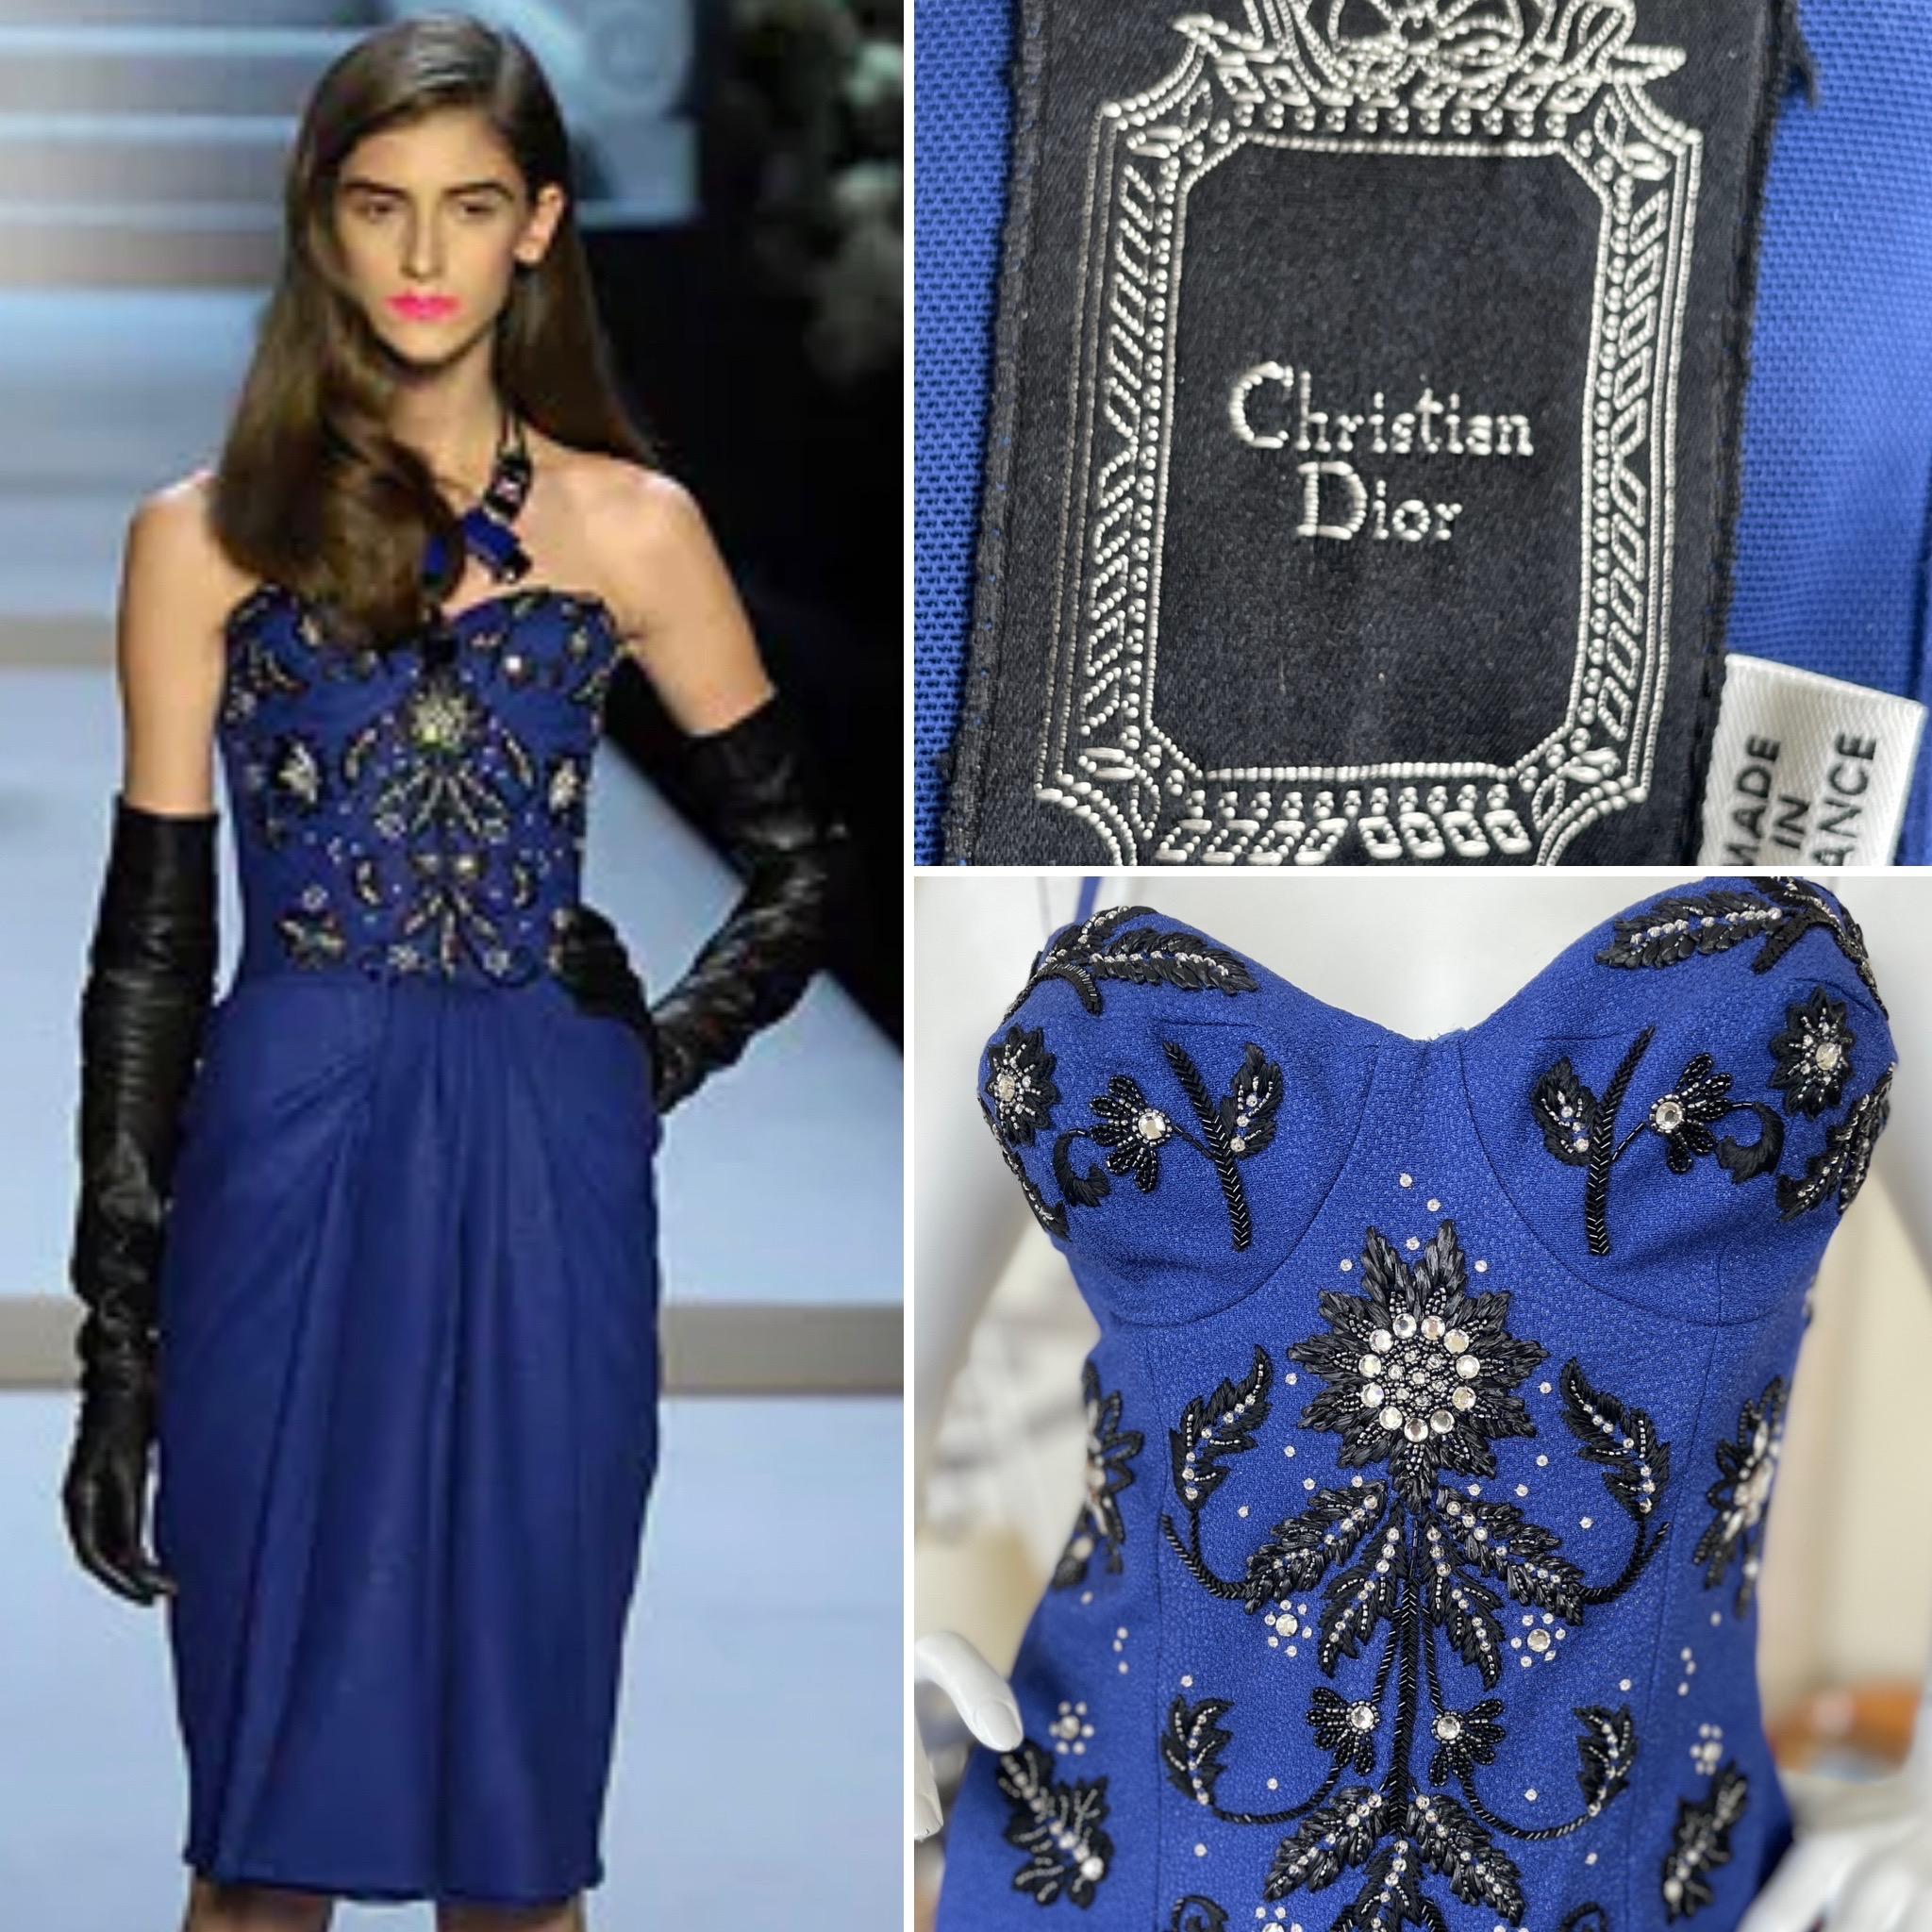 Christian Dior by John Galliano Fall 2007 Blue Dress with Crystal Details.
There are detachable shoulder straps, it was shown on the runway without straps.
Marked size 40 more like 4 in today's size
 Bust 35